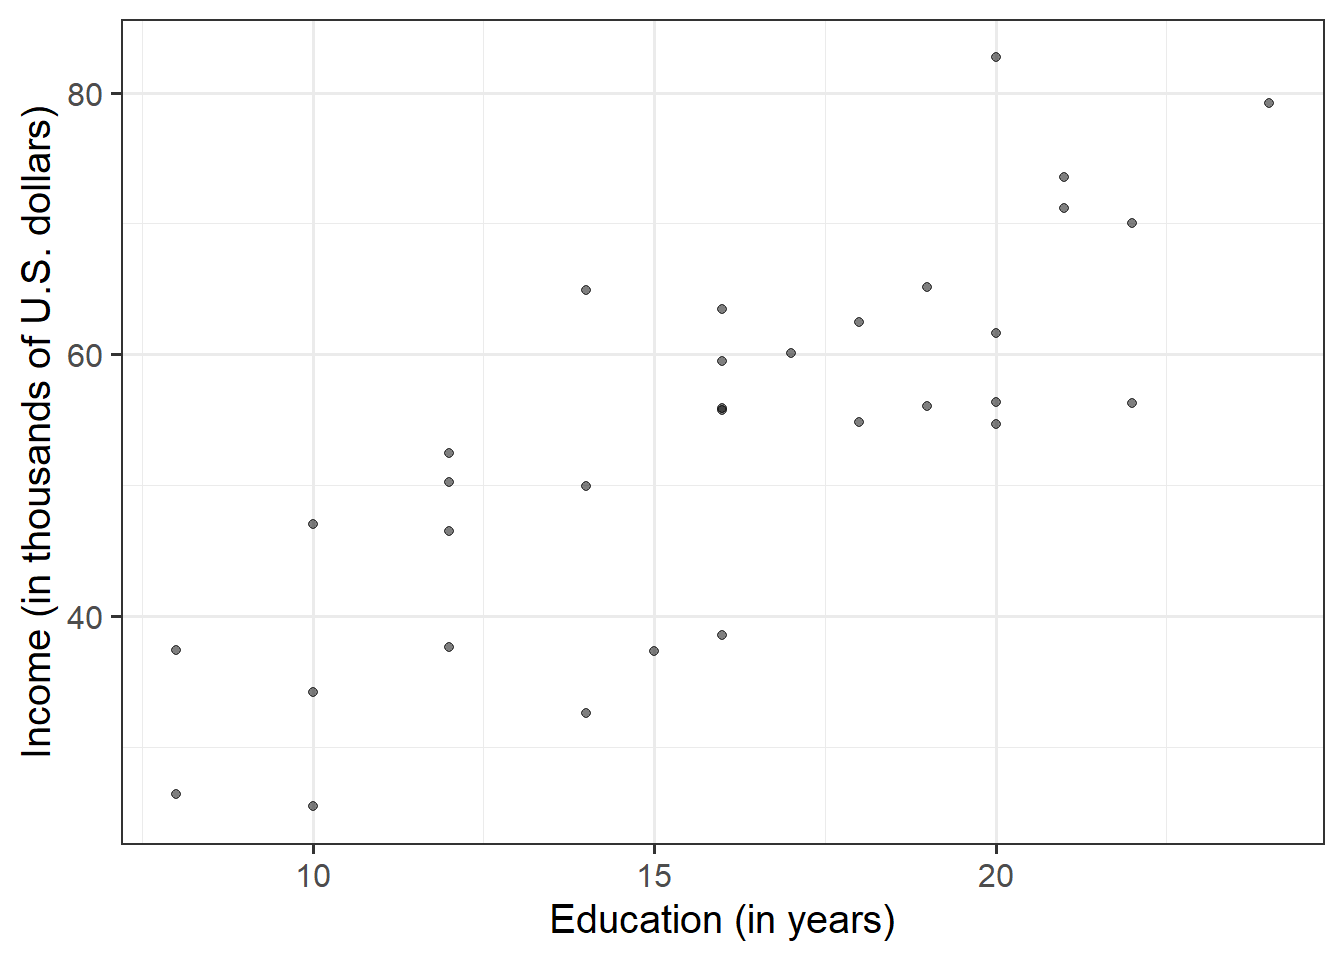 The relationship between employees' education level and income.